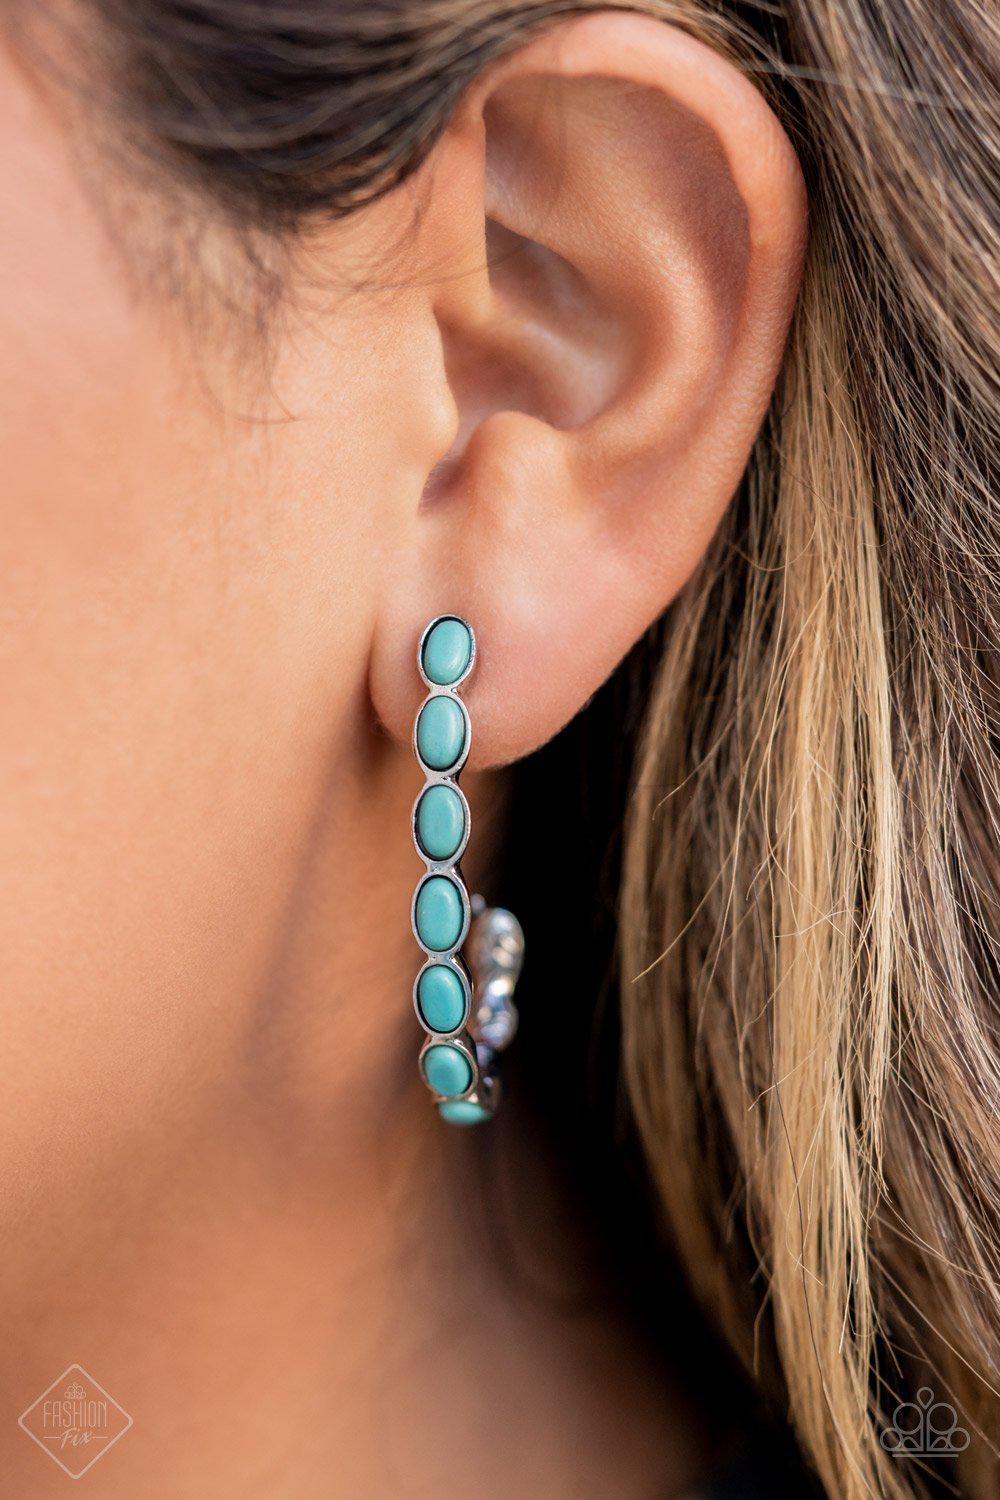 Kick Up a SANDSTORM Turquoise Blue Stone Hoop Earrings - Paparazzi Accessories- model - CarasShop.com - $5 Jewelry by Cara Jewels